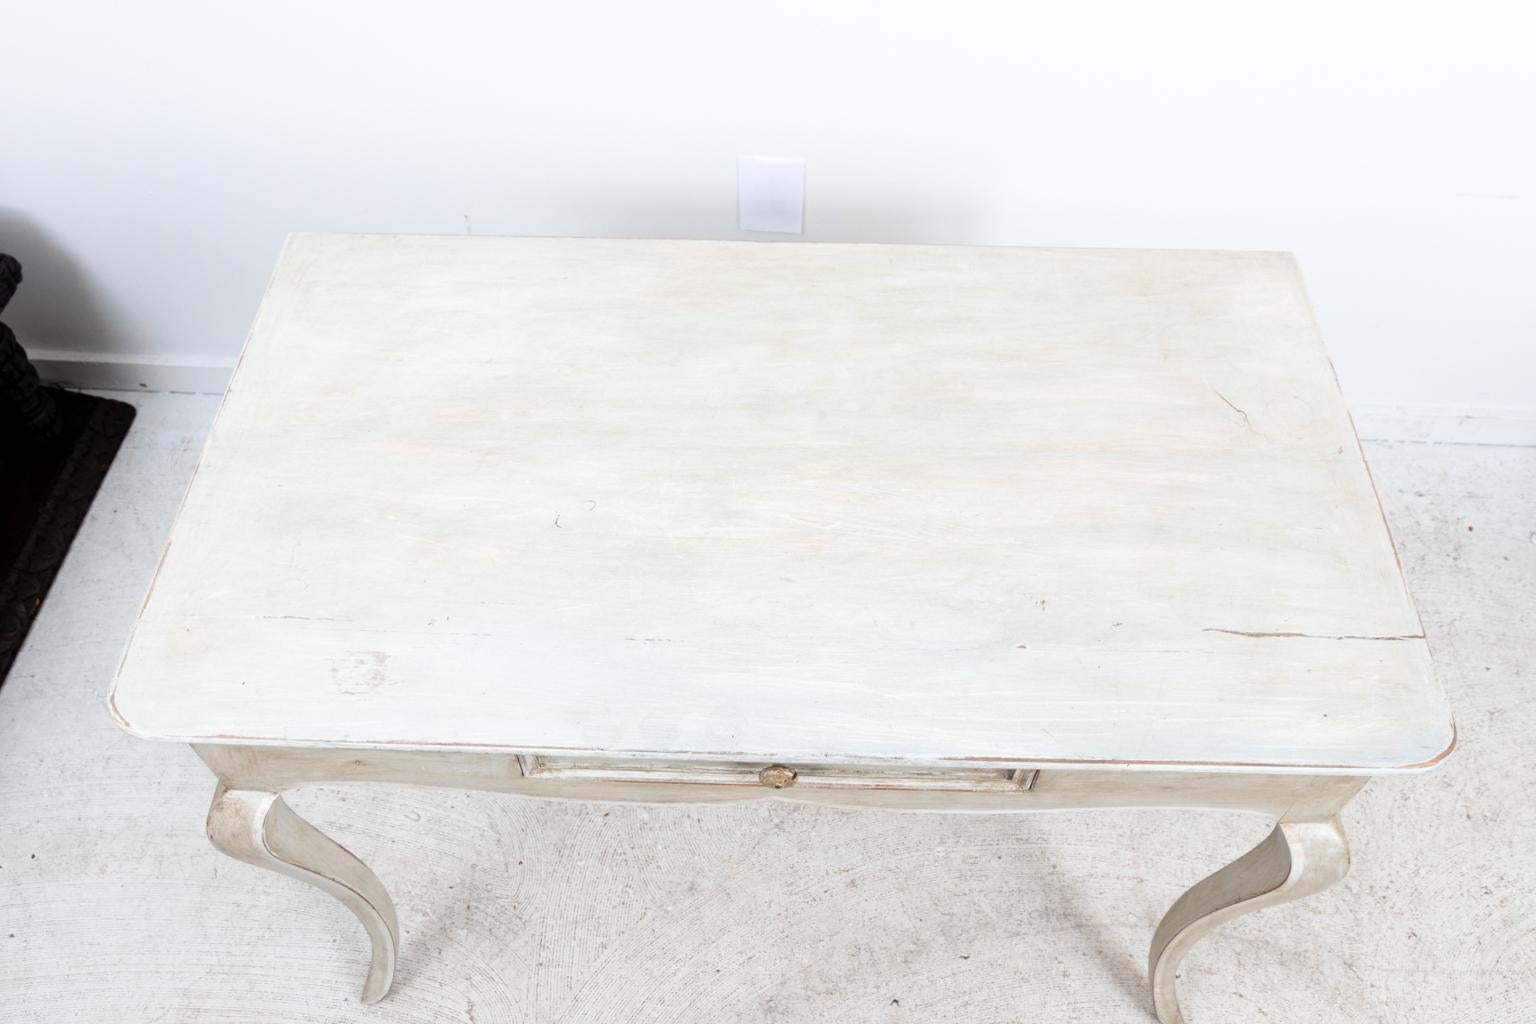 Circa 1920s French Louis XV style antique painted console in a cream color with white accents. The piece also features a single drawer. Purchased at Marche Au Pures. Made in France. Please note of wear consistent with age, the drawer catches lightly